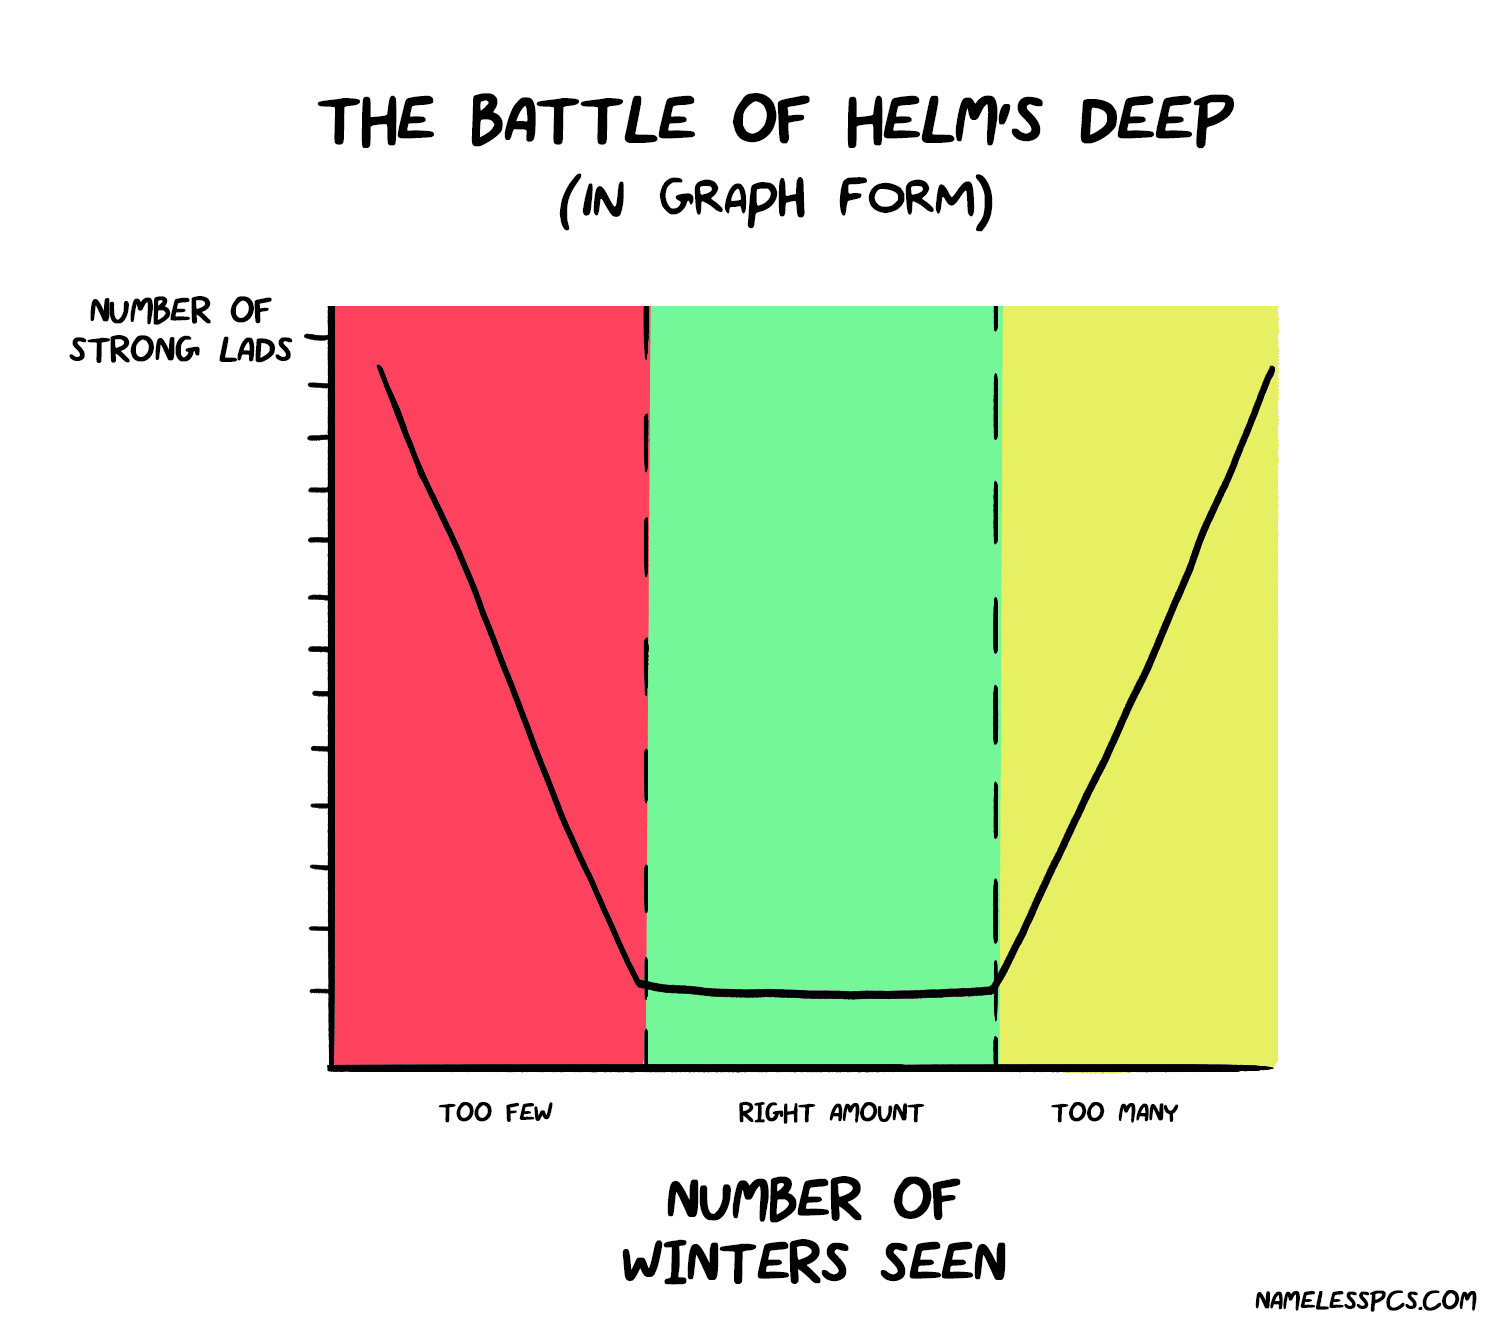 Graph of “the Battle of Helm’s Deep”